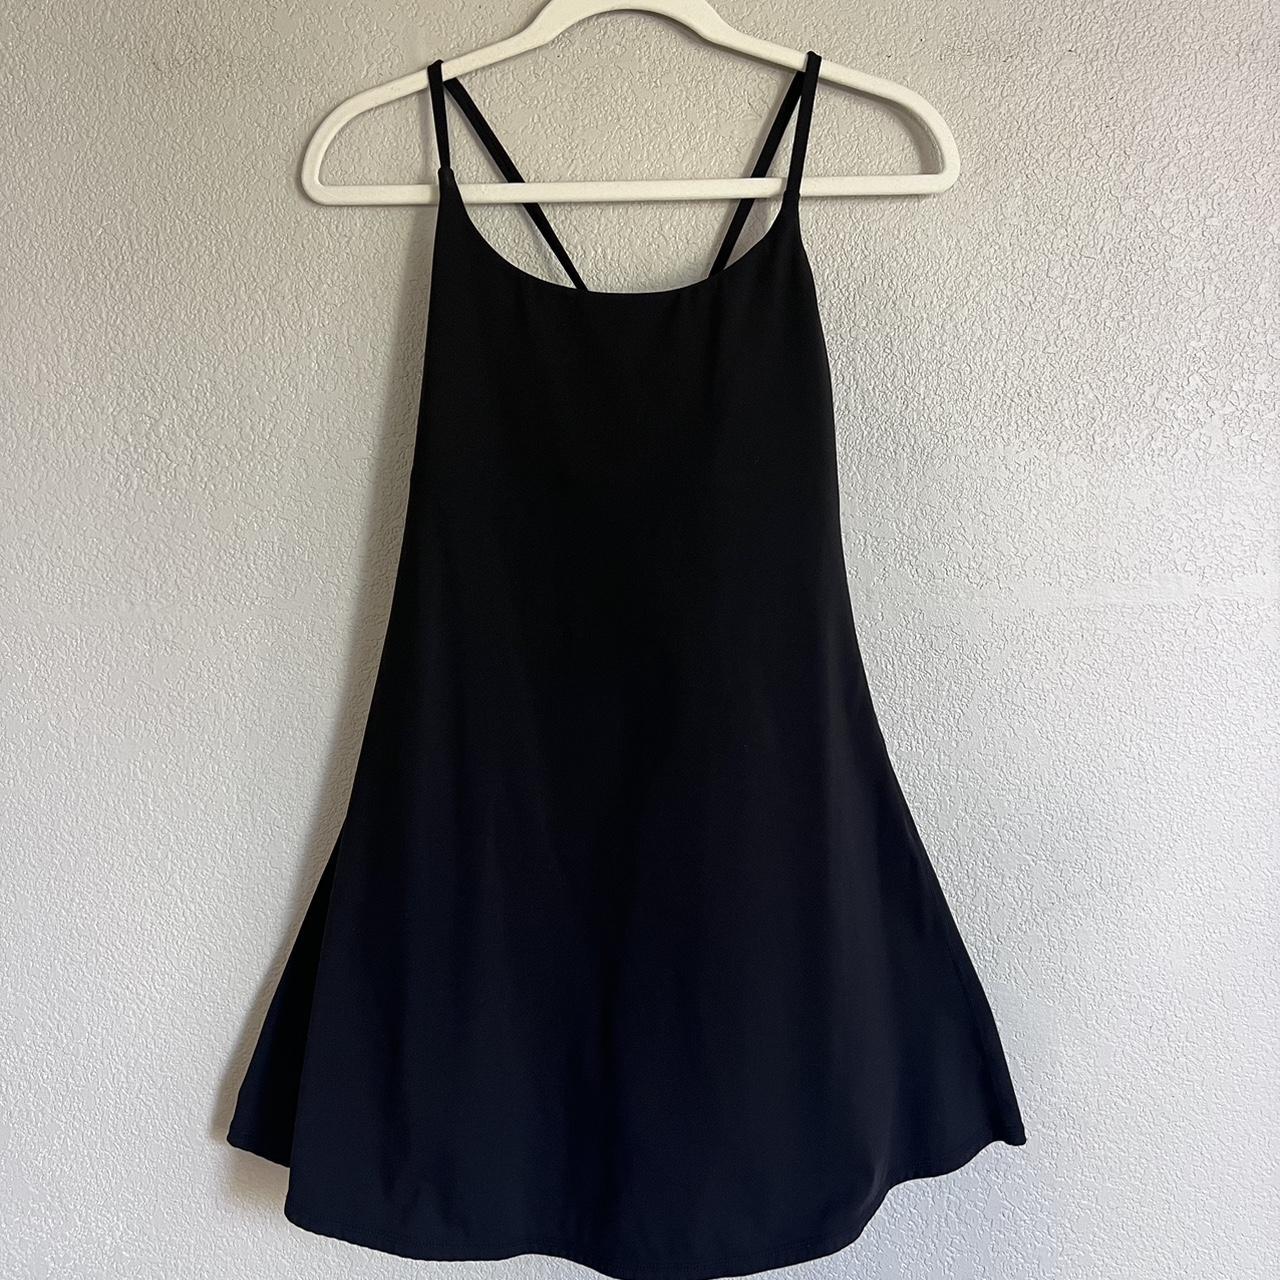 exercise dress with built in bra and shorts w pocket - Depop